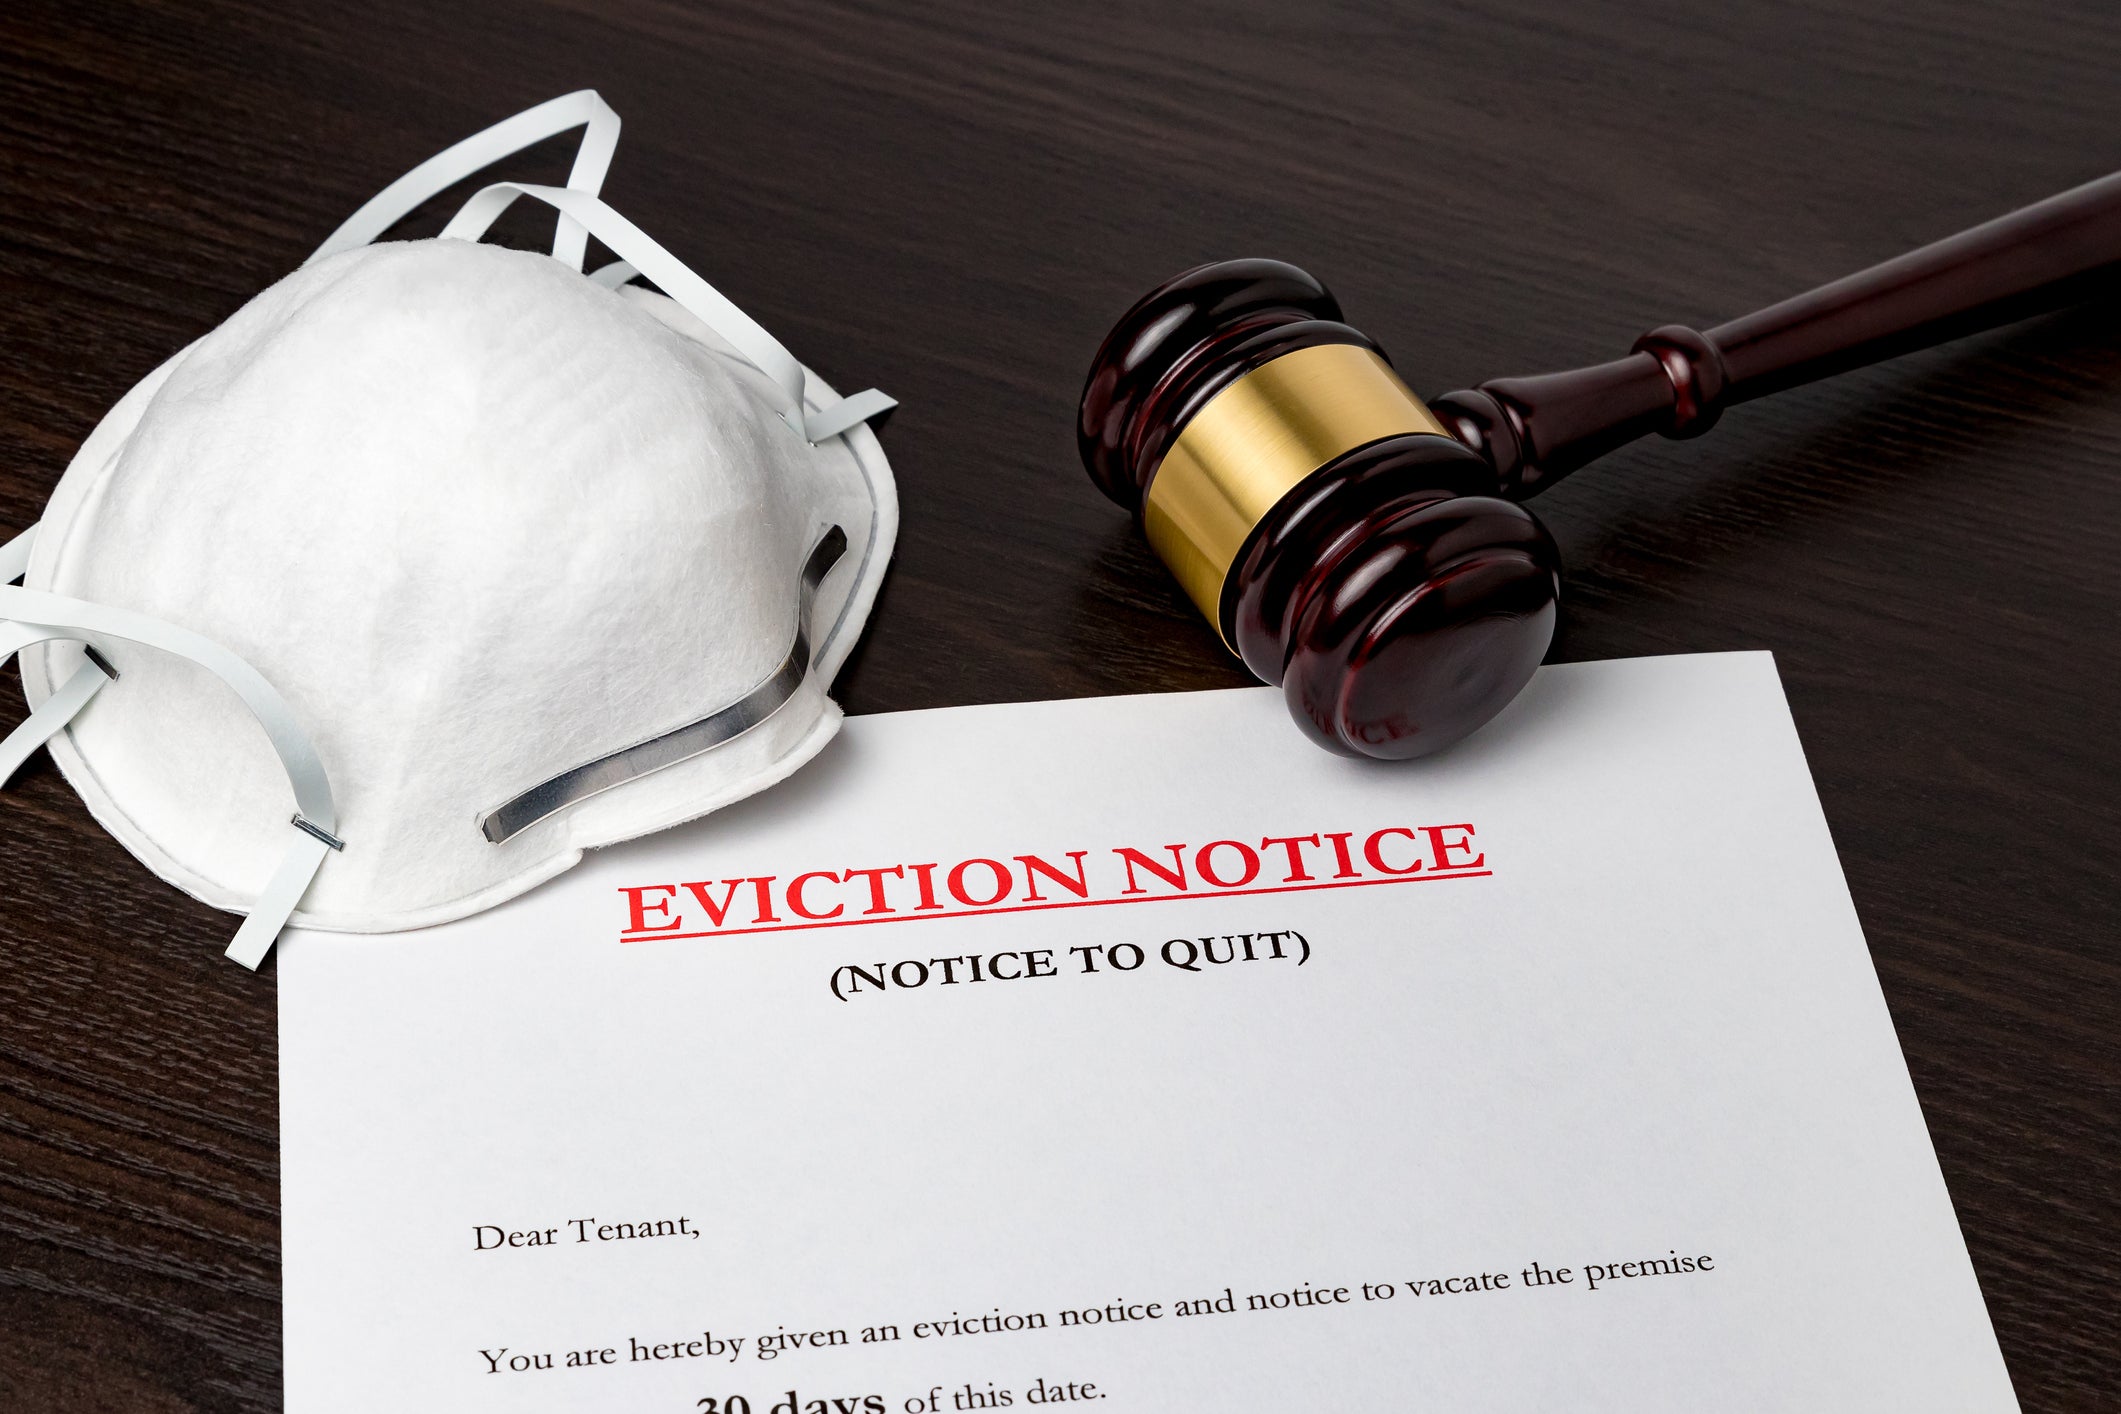 Eviction notice document with gavel and N95 face mask on a table.